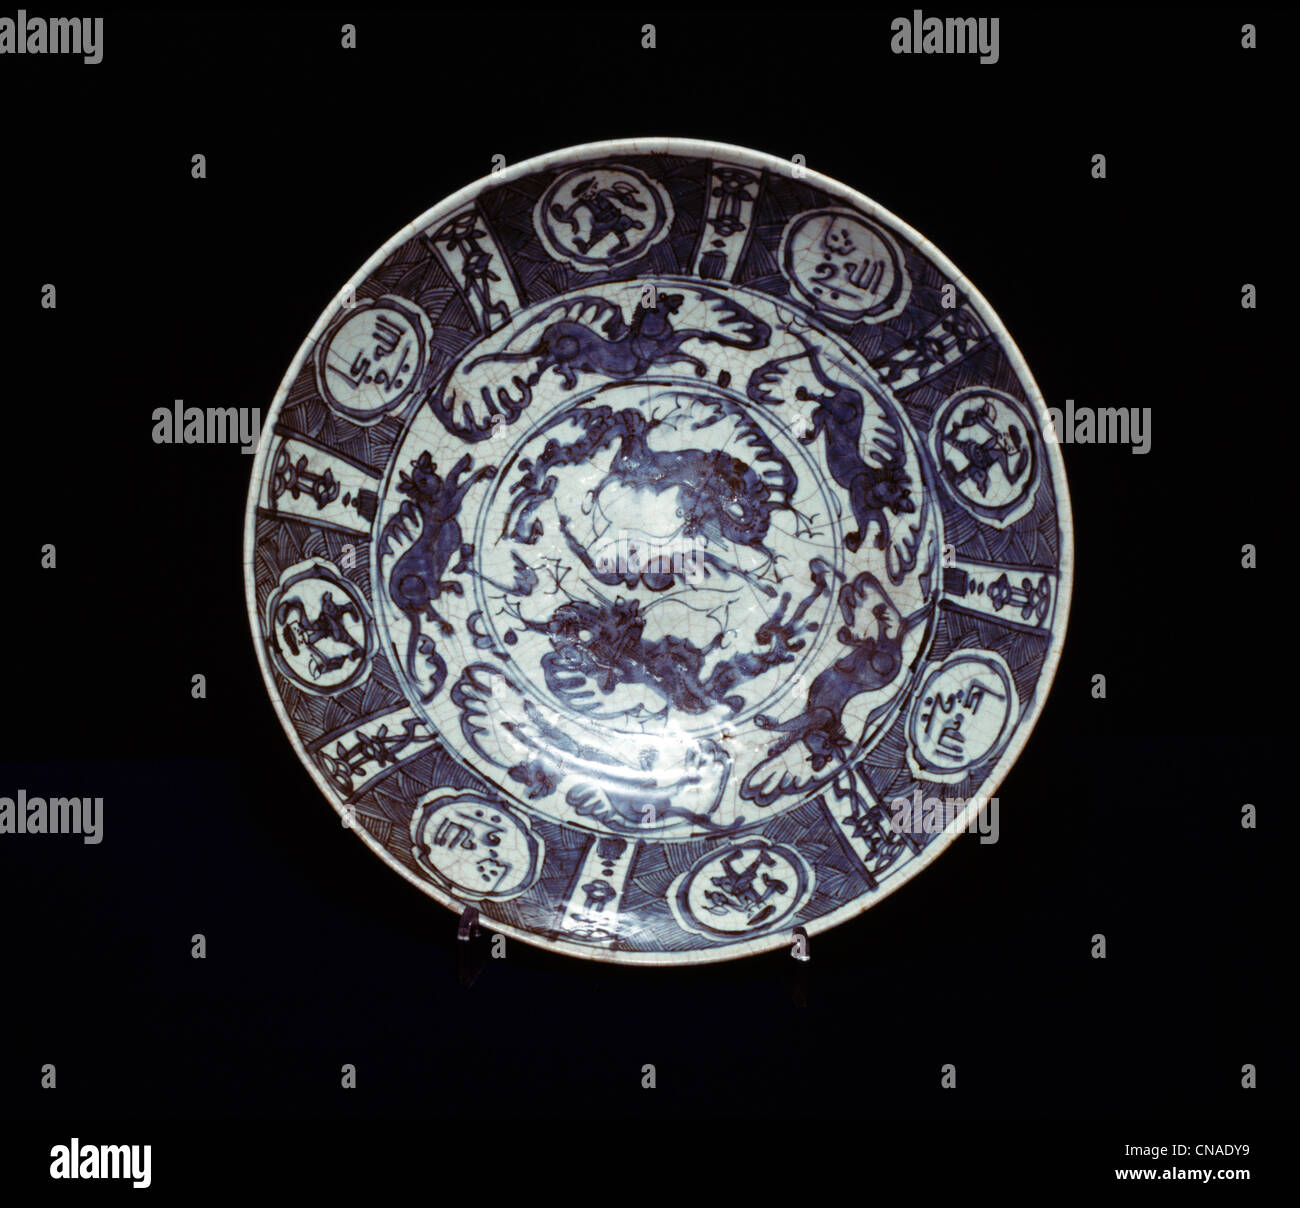 Ceramic Plate With Islamic Calligraphy Stock Photo